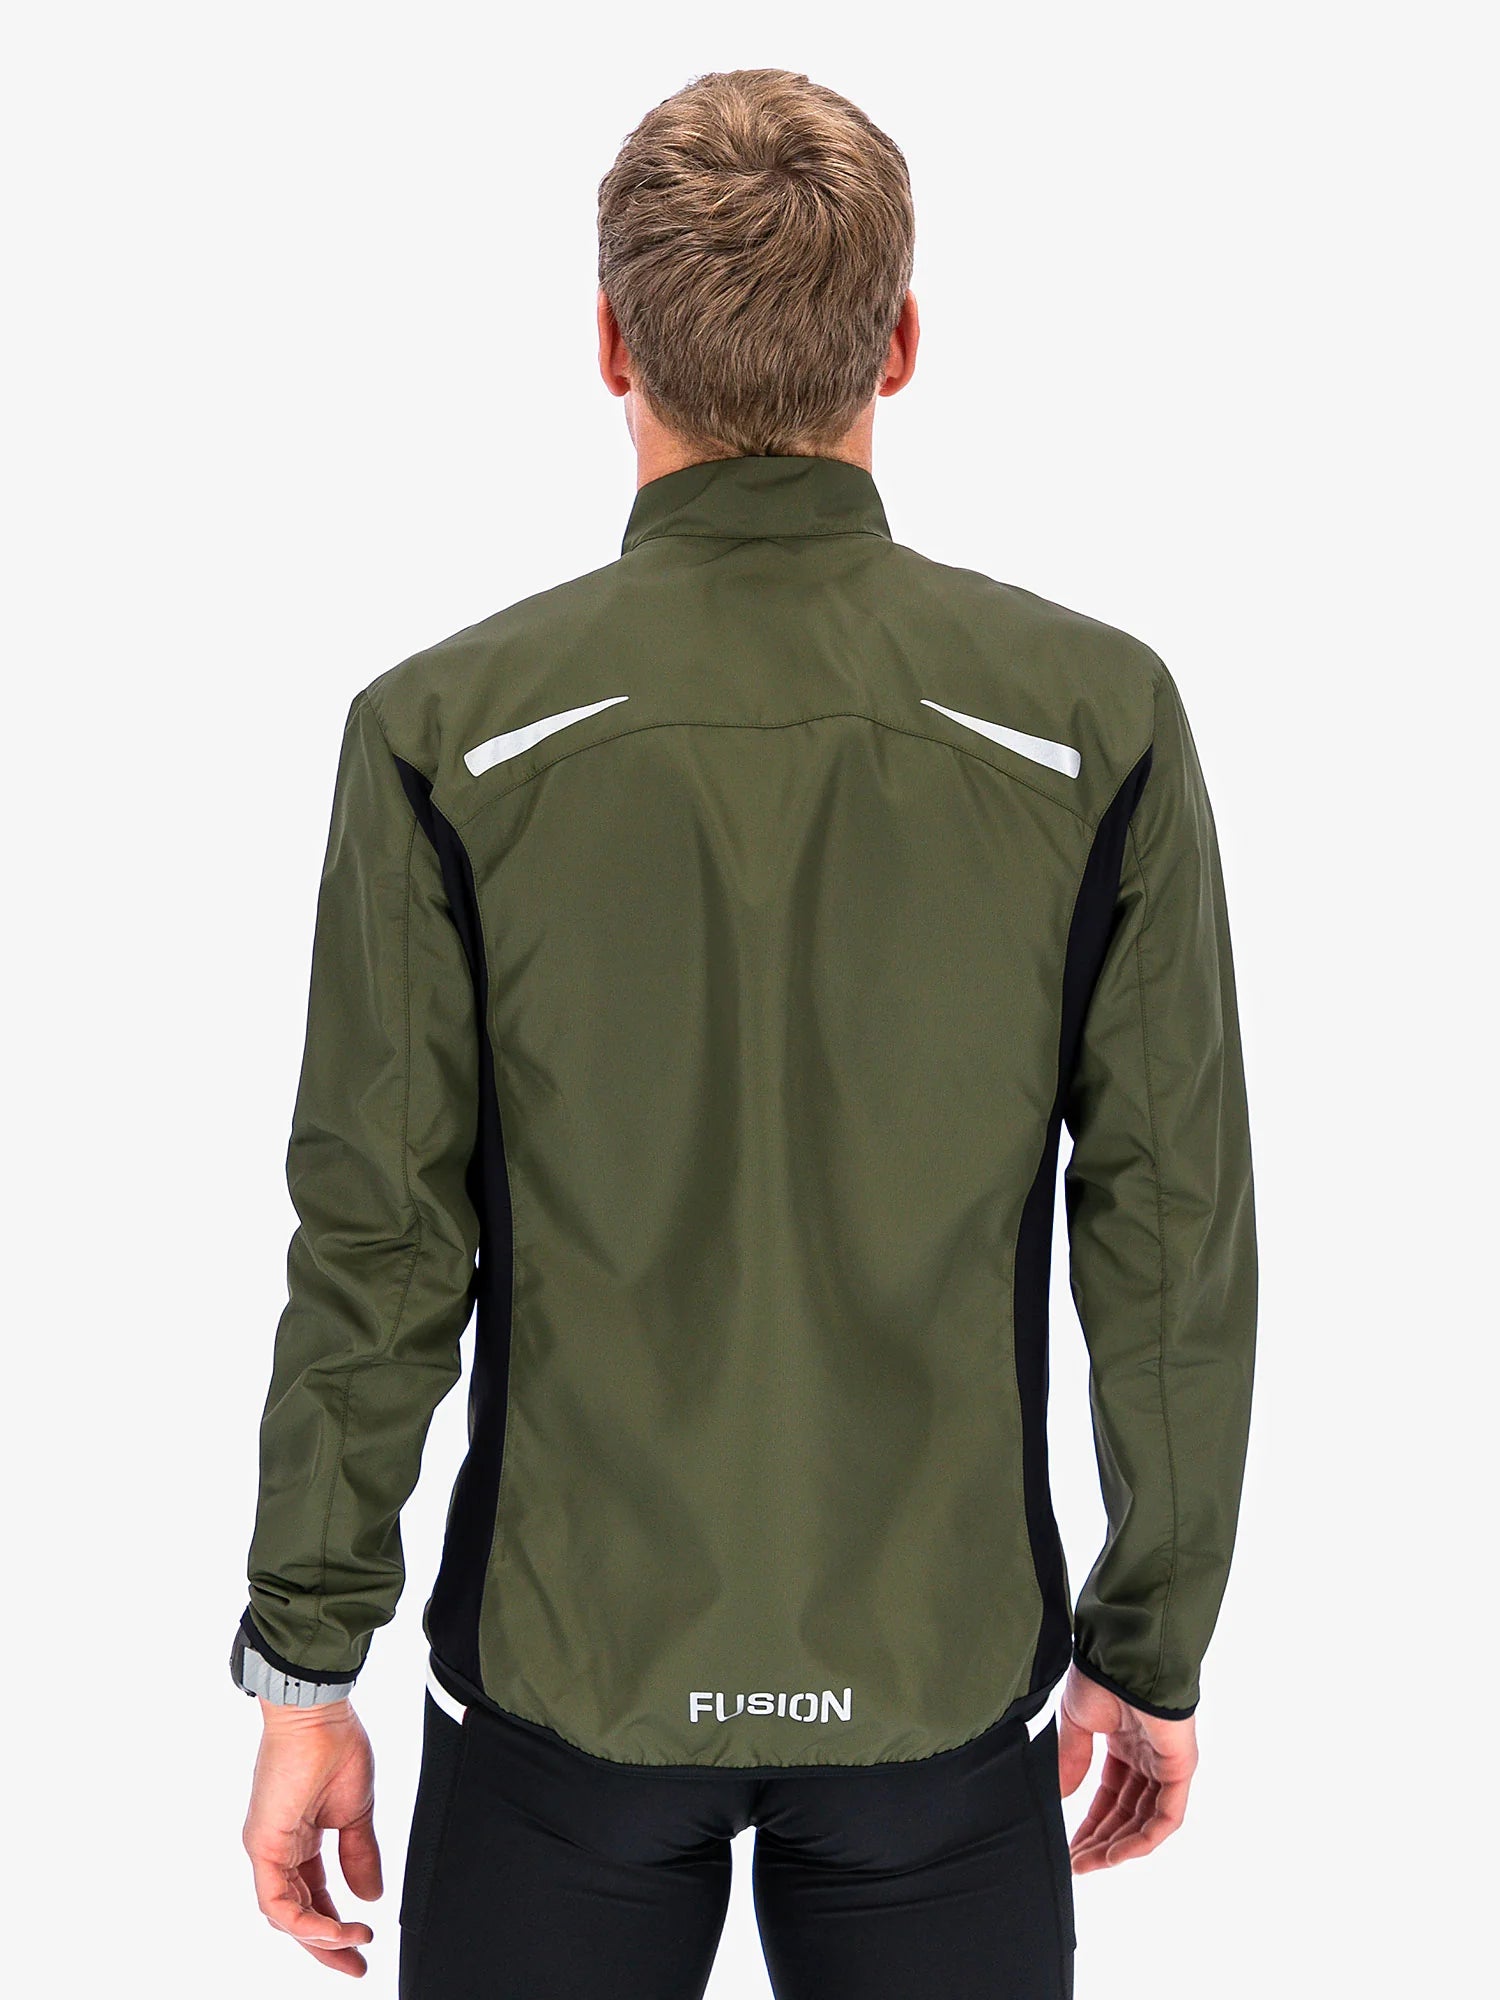 Fusion Men's S1 Run Jacket in Green Back view showing 3M reflective strips